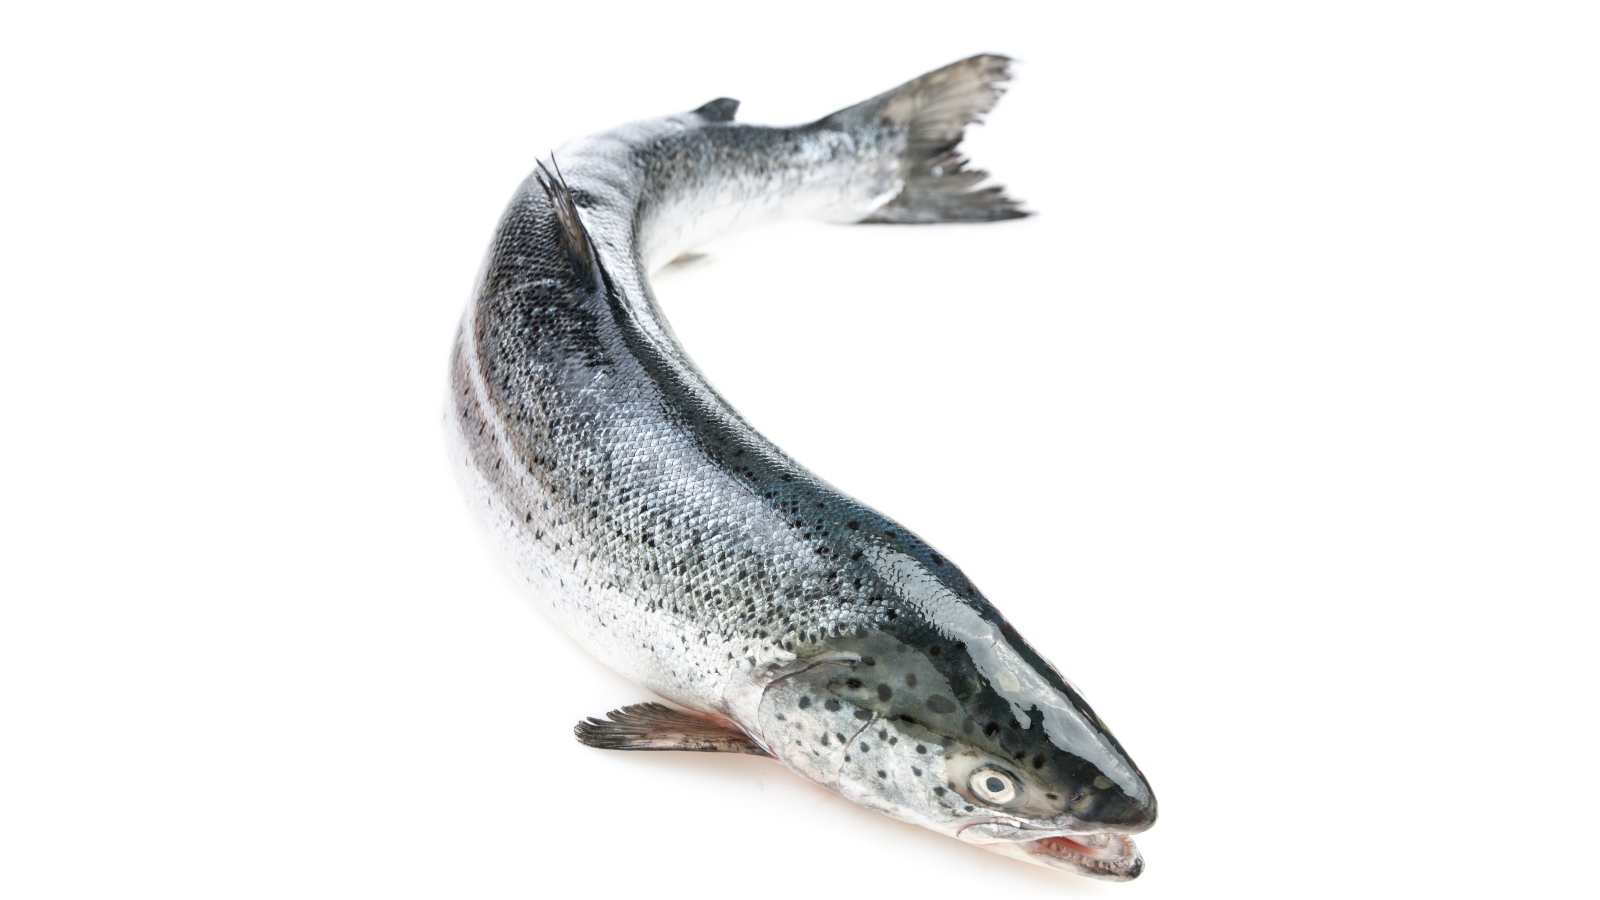 Big fresh trout fish on a white background